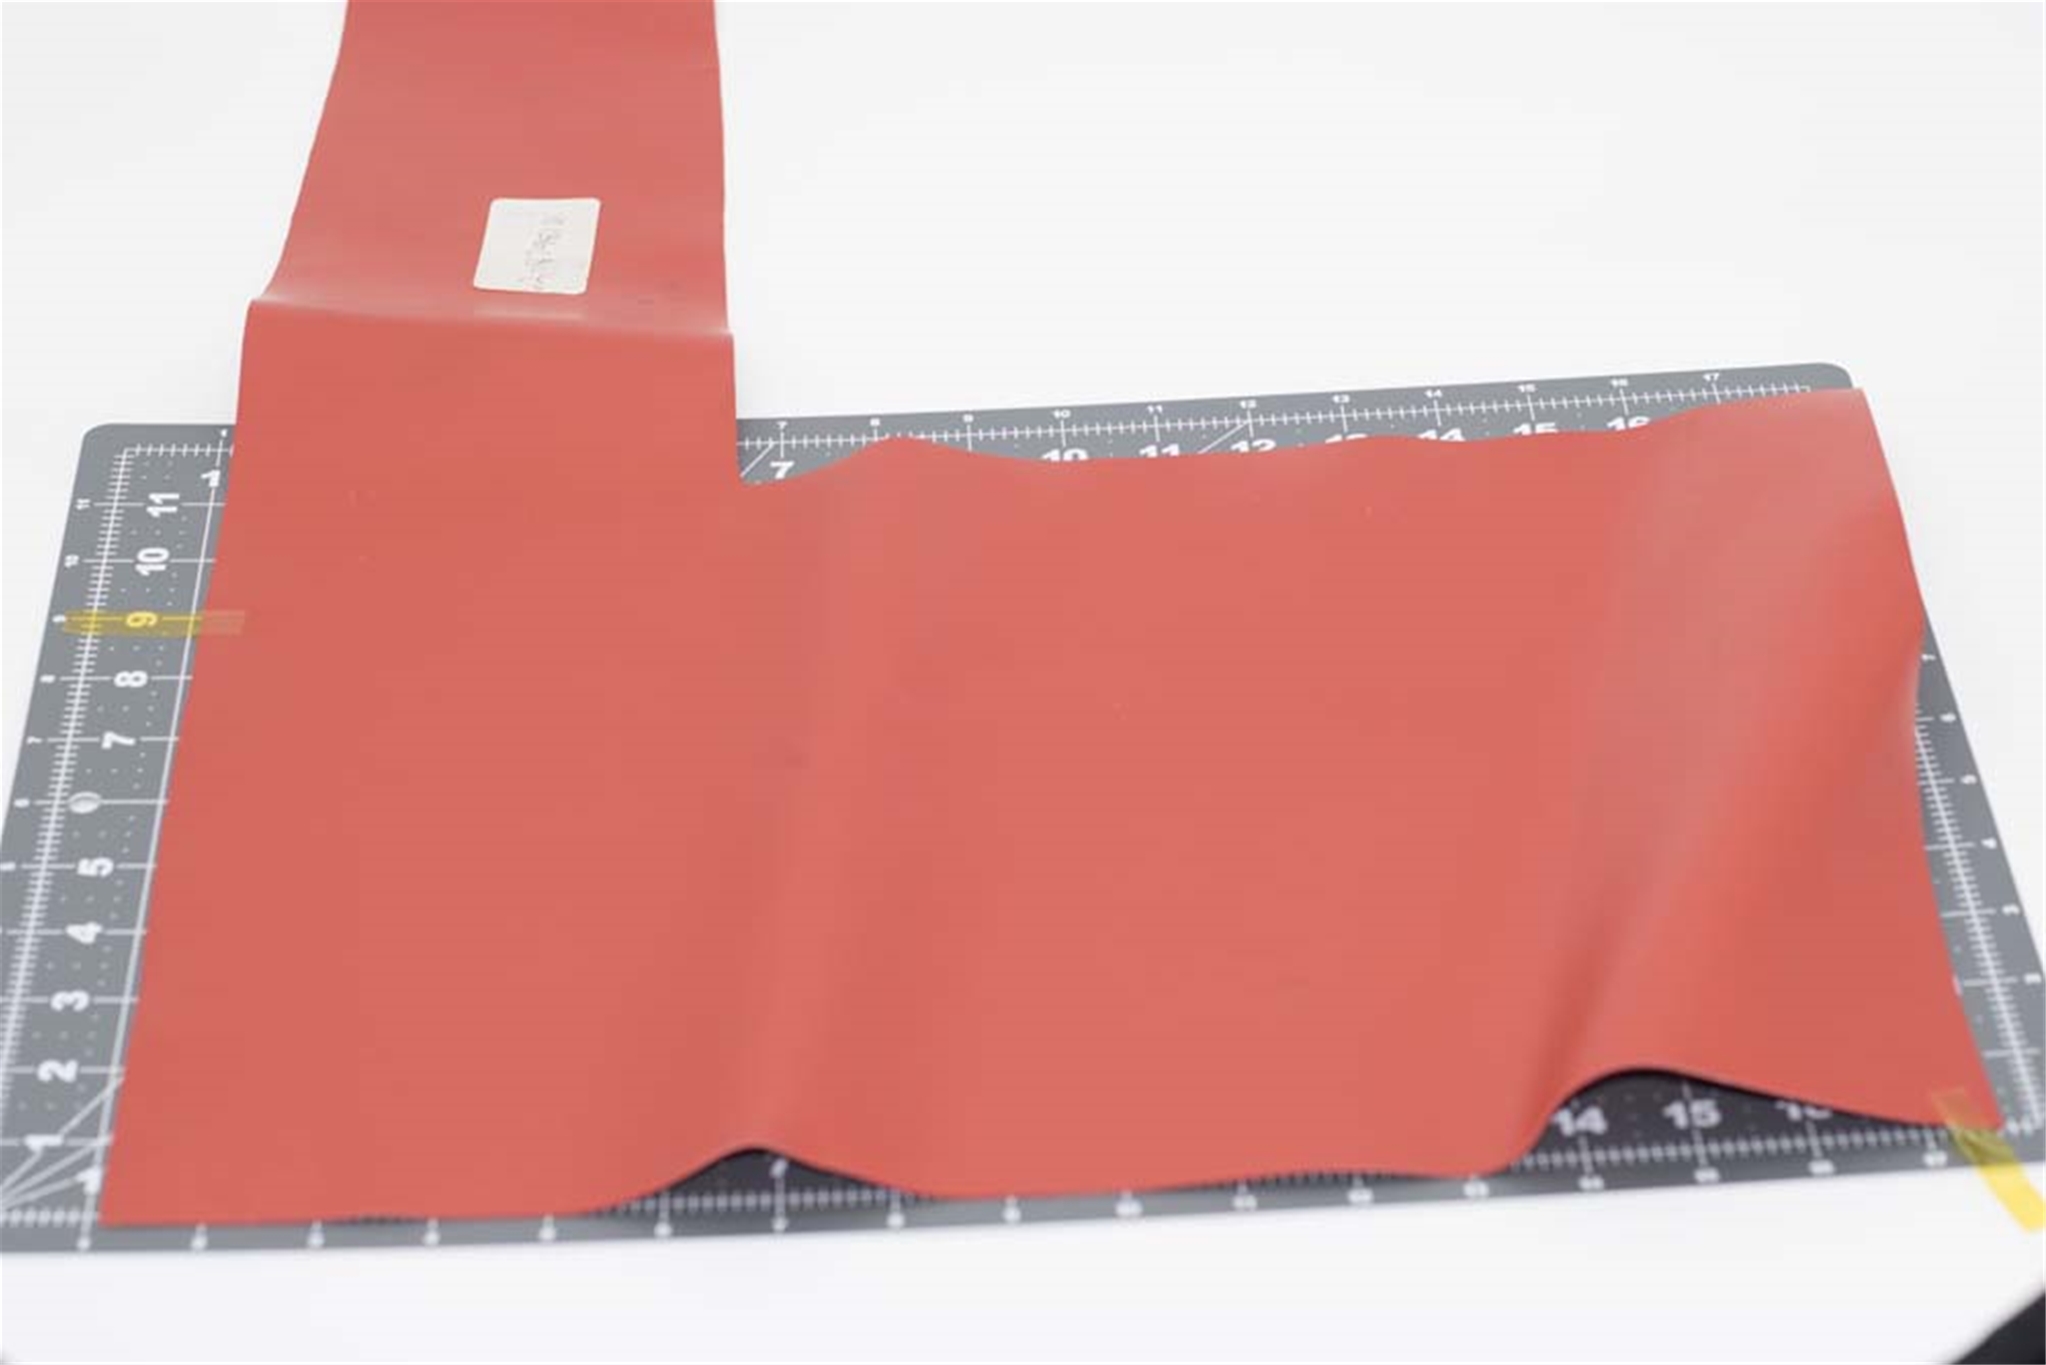 62-879810 Fabric Pvc Red Ss To 62-884706